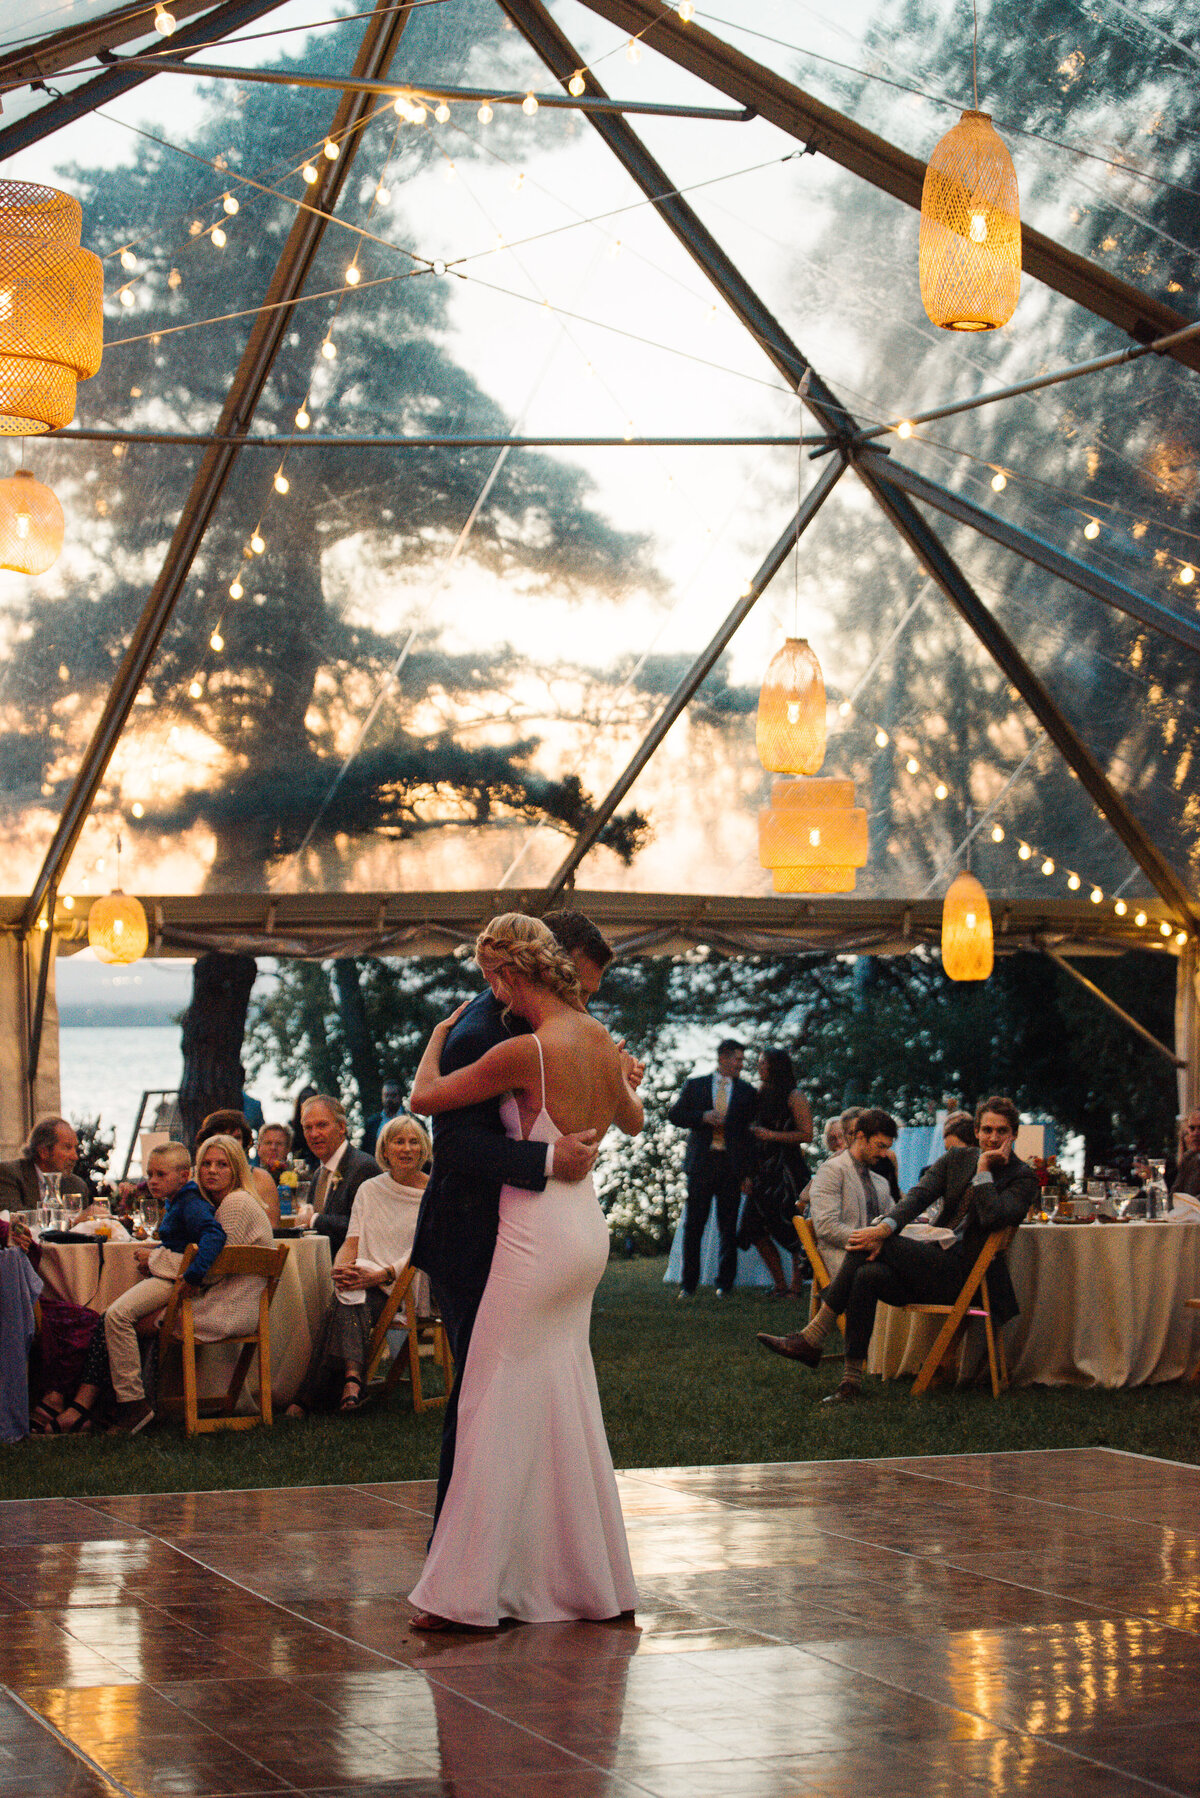 Romantic first dance in cleartop tent at sunset